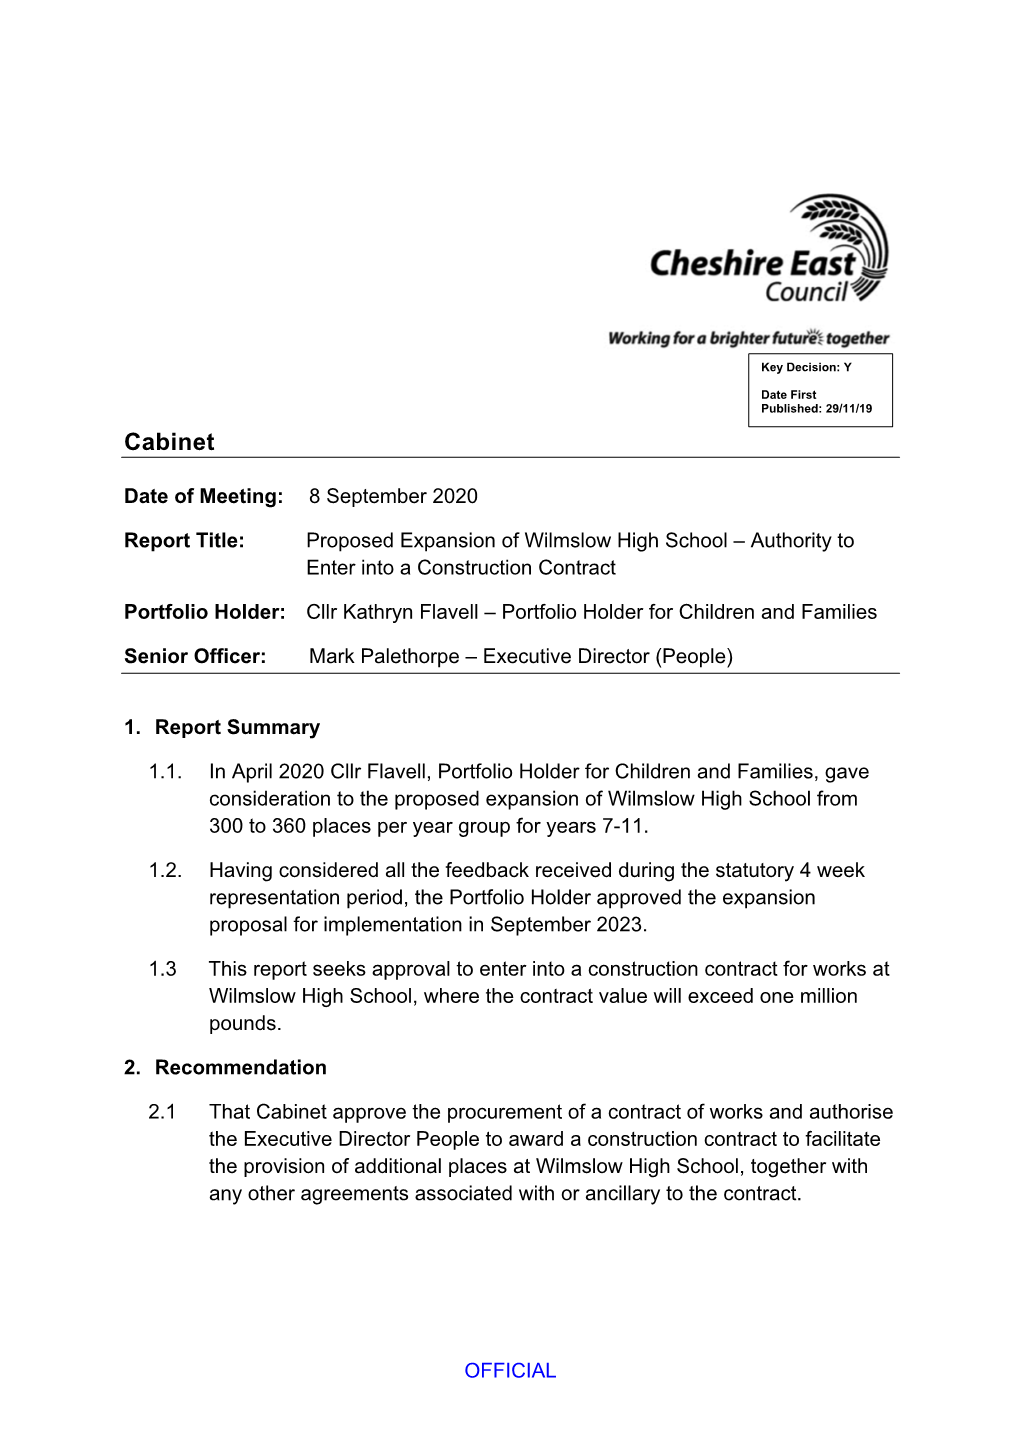 Proposed Expansion of Wilmslow High School – Authority to Enter Into a Construction Contract